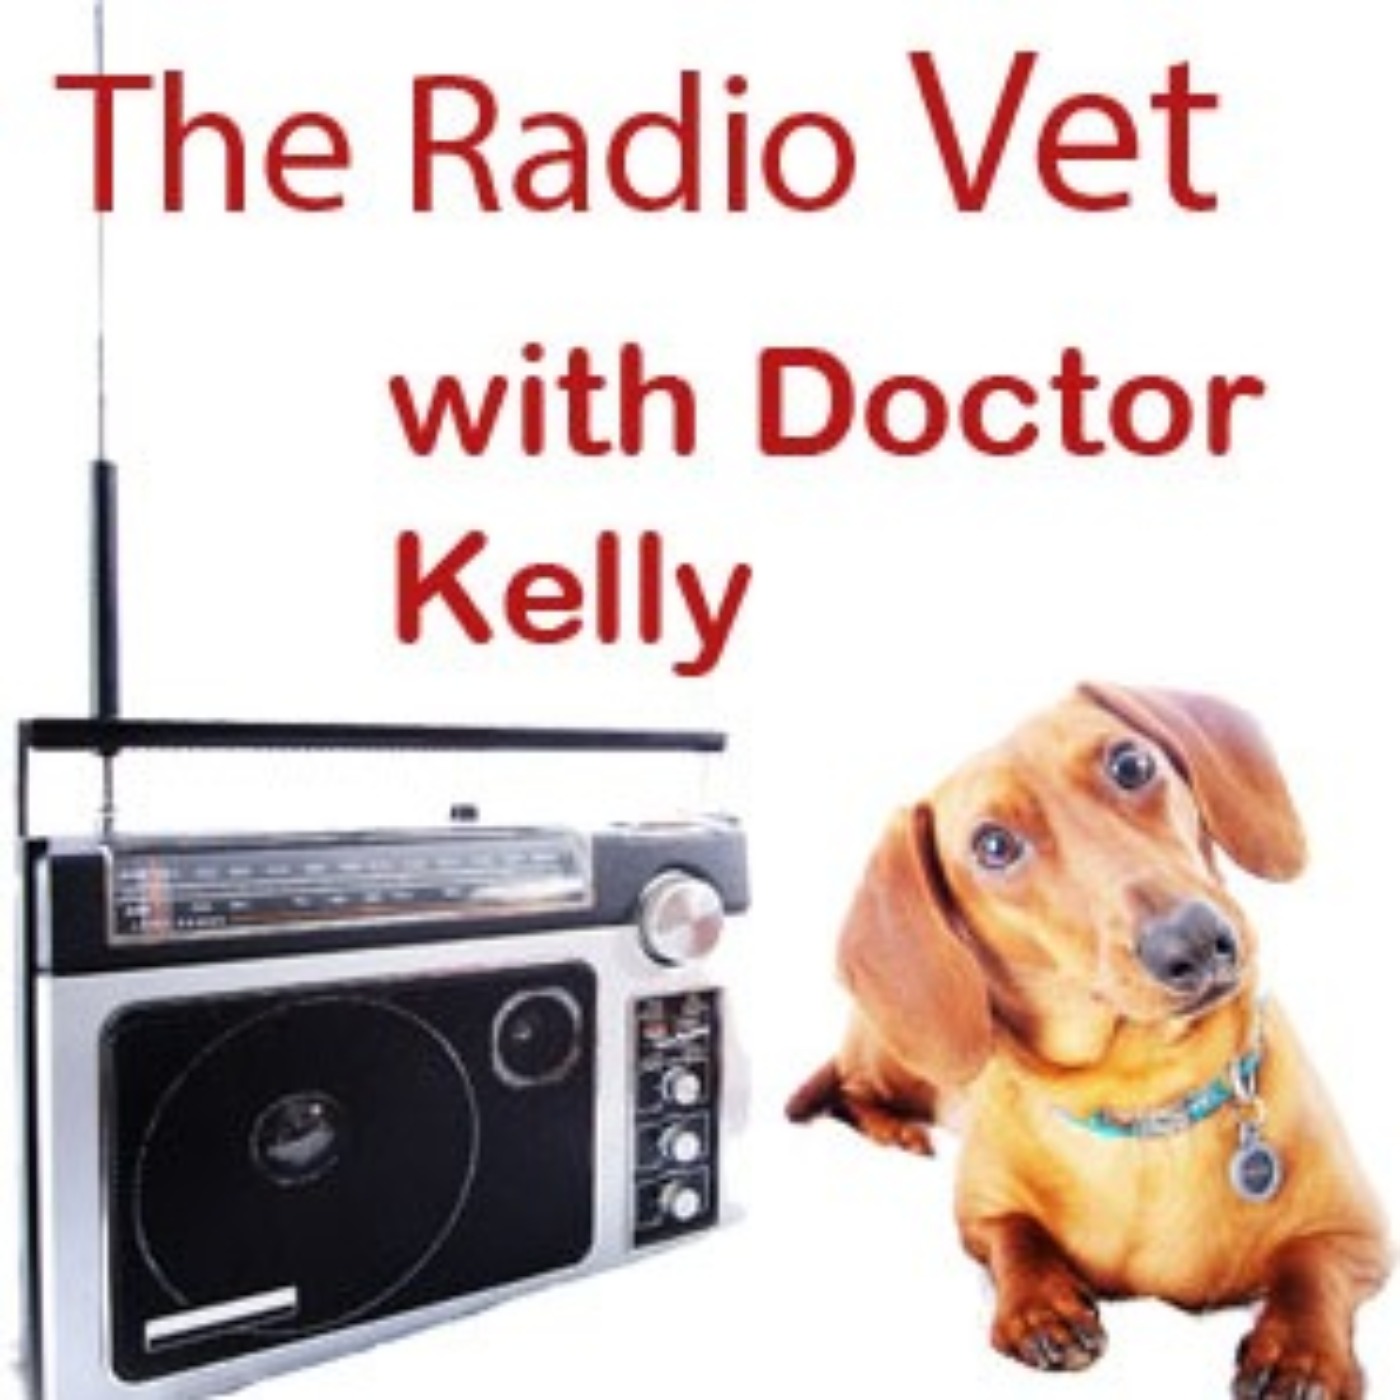 The Radio Vet with Dr. Kelly - "Canine Aggression"